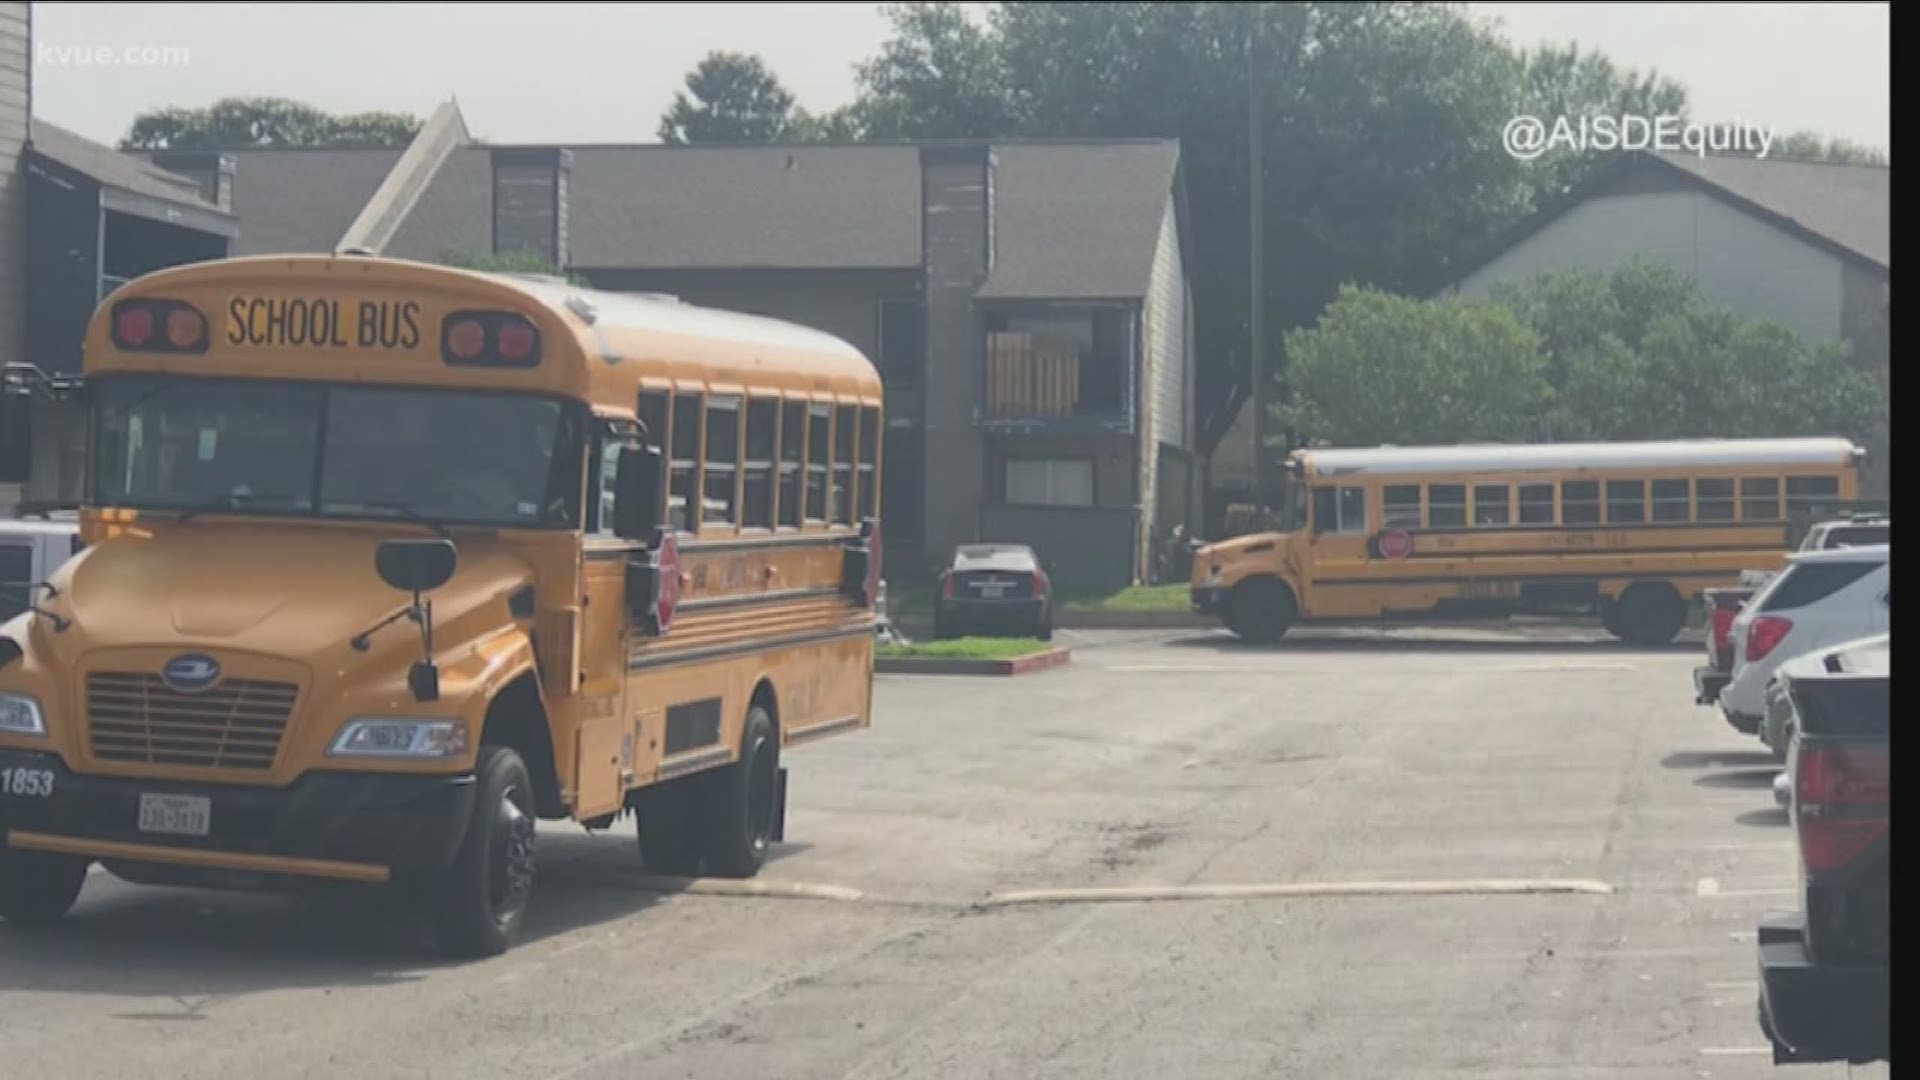 In an effort to bridge the technology gap, the Austin Independent School District has deployed 110 WiFi-equipped buses to serve neighborhoods with the highest needs.